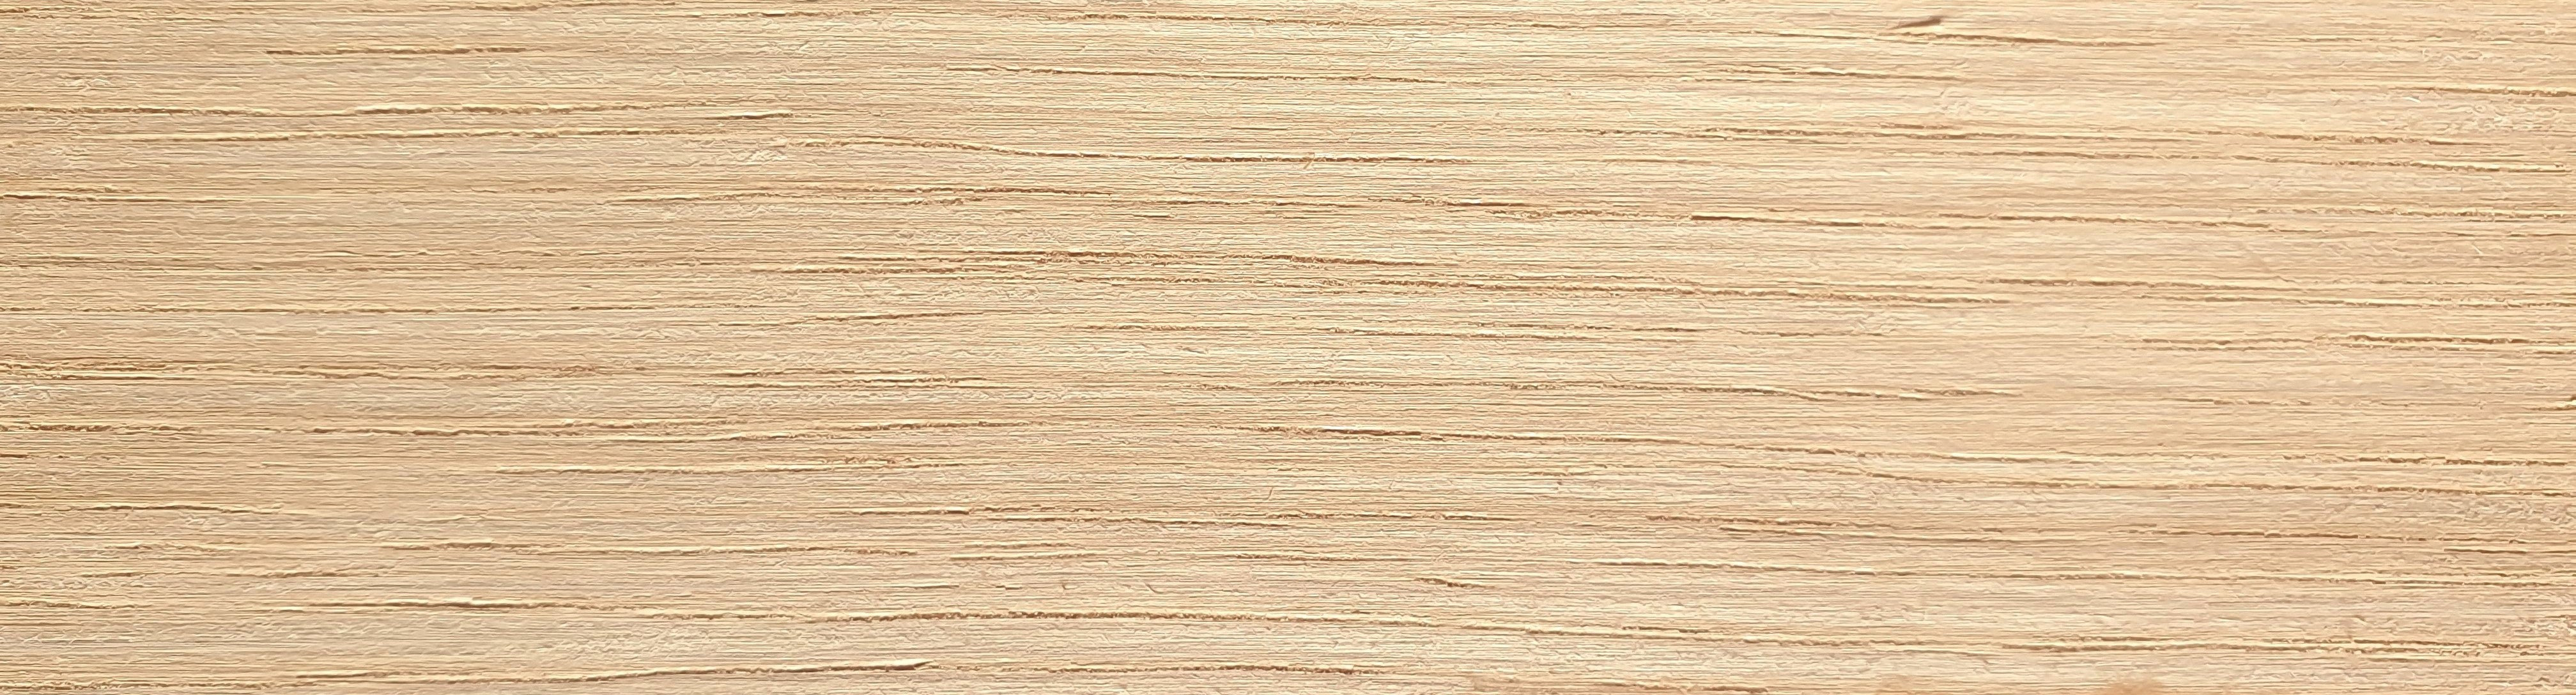 American White Oak Thickwood Unglued Edging / Lipping 24mm x 1mm Thick Oak Wood Edging